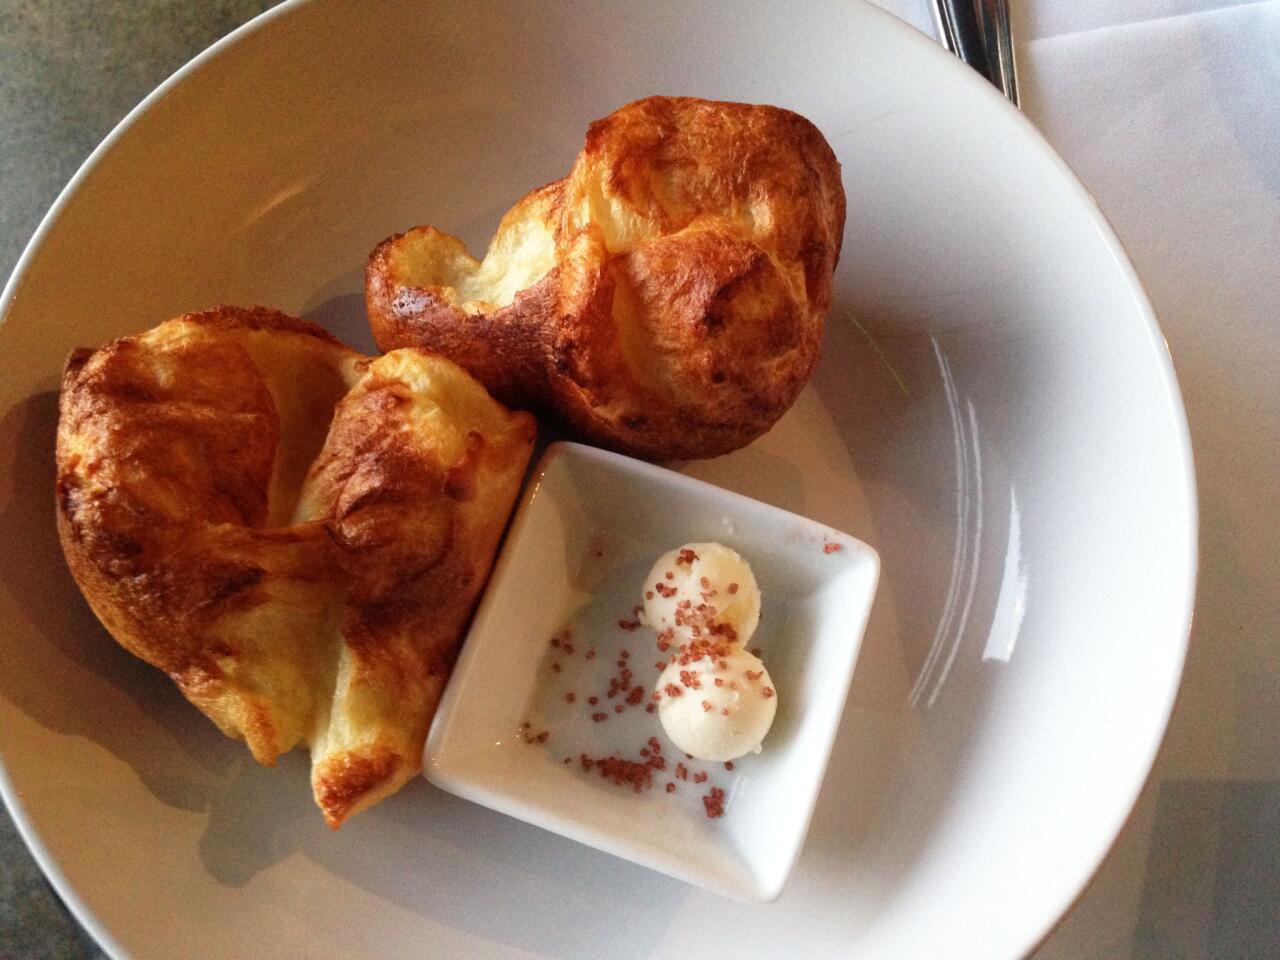 Popovers serve as an amuse bouche at Class Kitchen, a student-run pop-up restaurant in Costa Mesa.